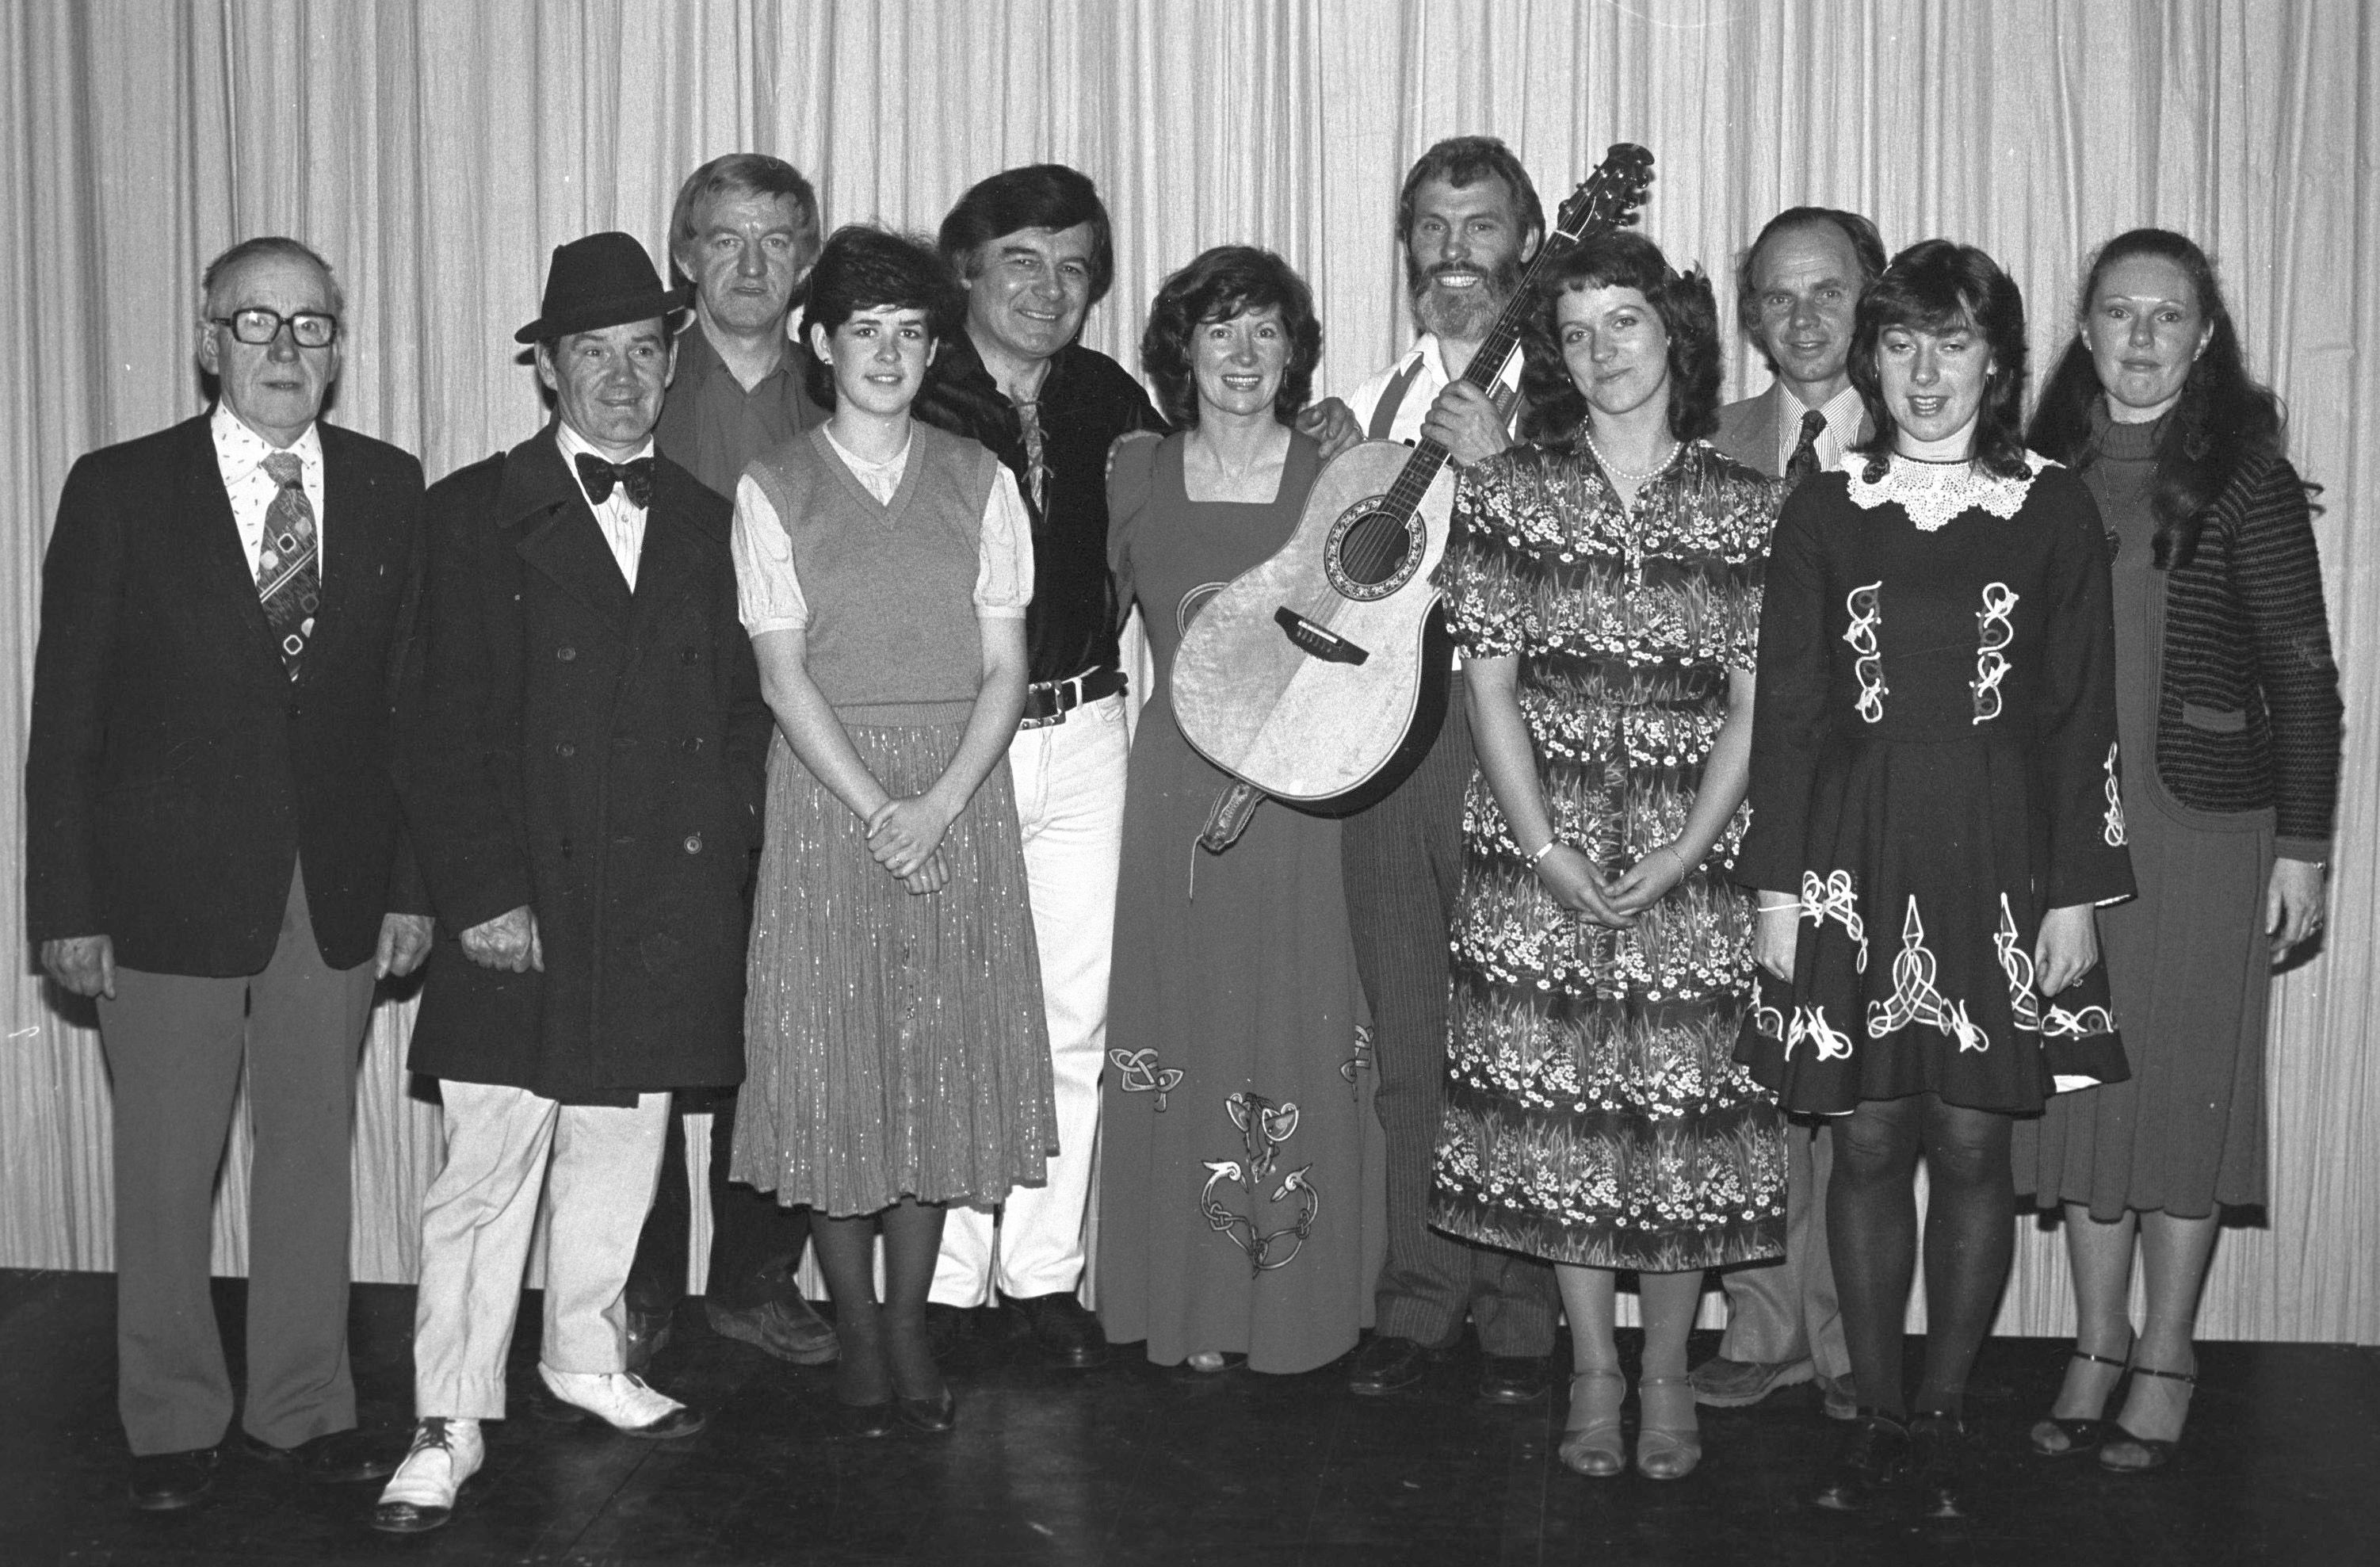 SHARE fundraiser in St Louise\'s with Jim Carty (MC), David Rowlands, Alice McEvoy (SHARE), Gerry Millar, Anne and Francie Brolly, Eileen Depo, Eileen Rocks, Susan Lavery. (A’town News, May 1982)